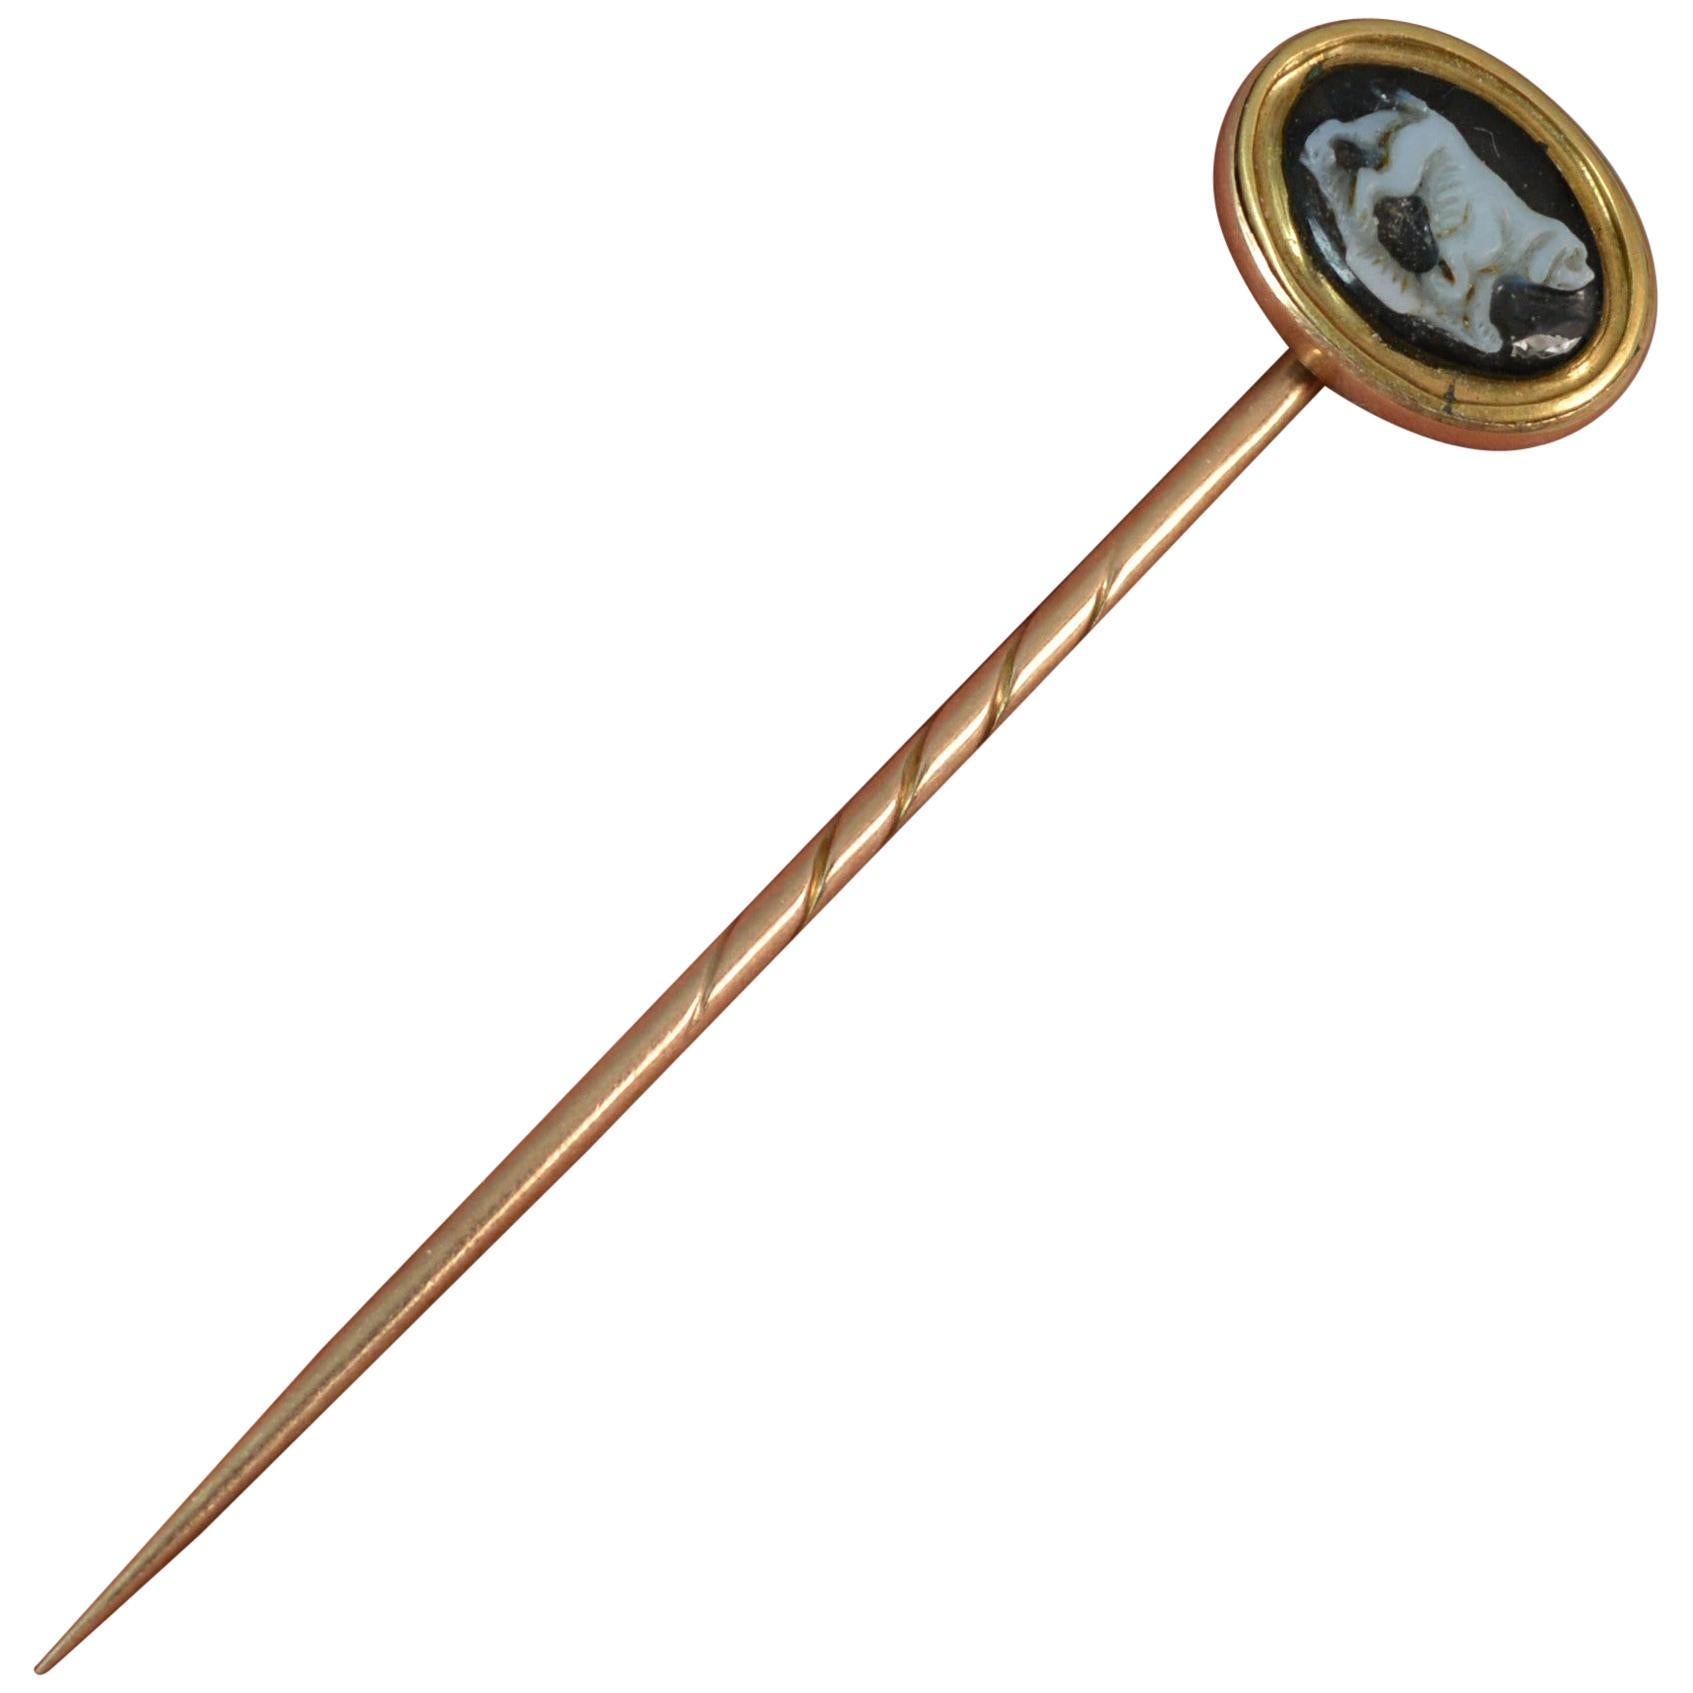 Antique Rose Gold and Carved Agate Stick Tie Pin, circa 1800